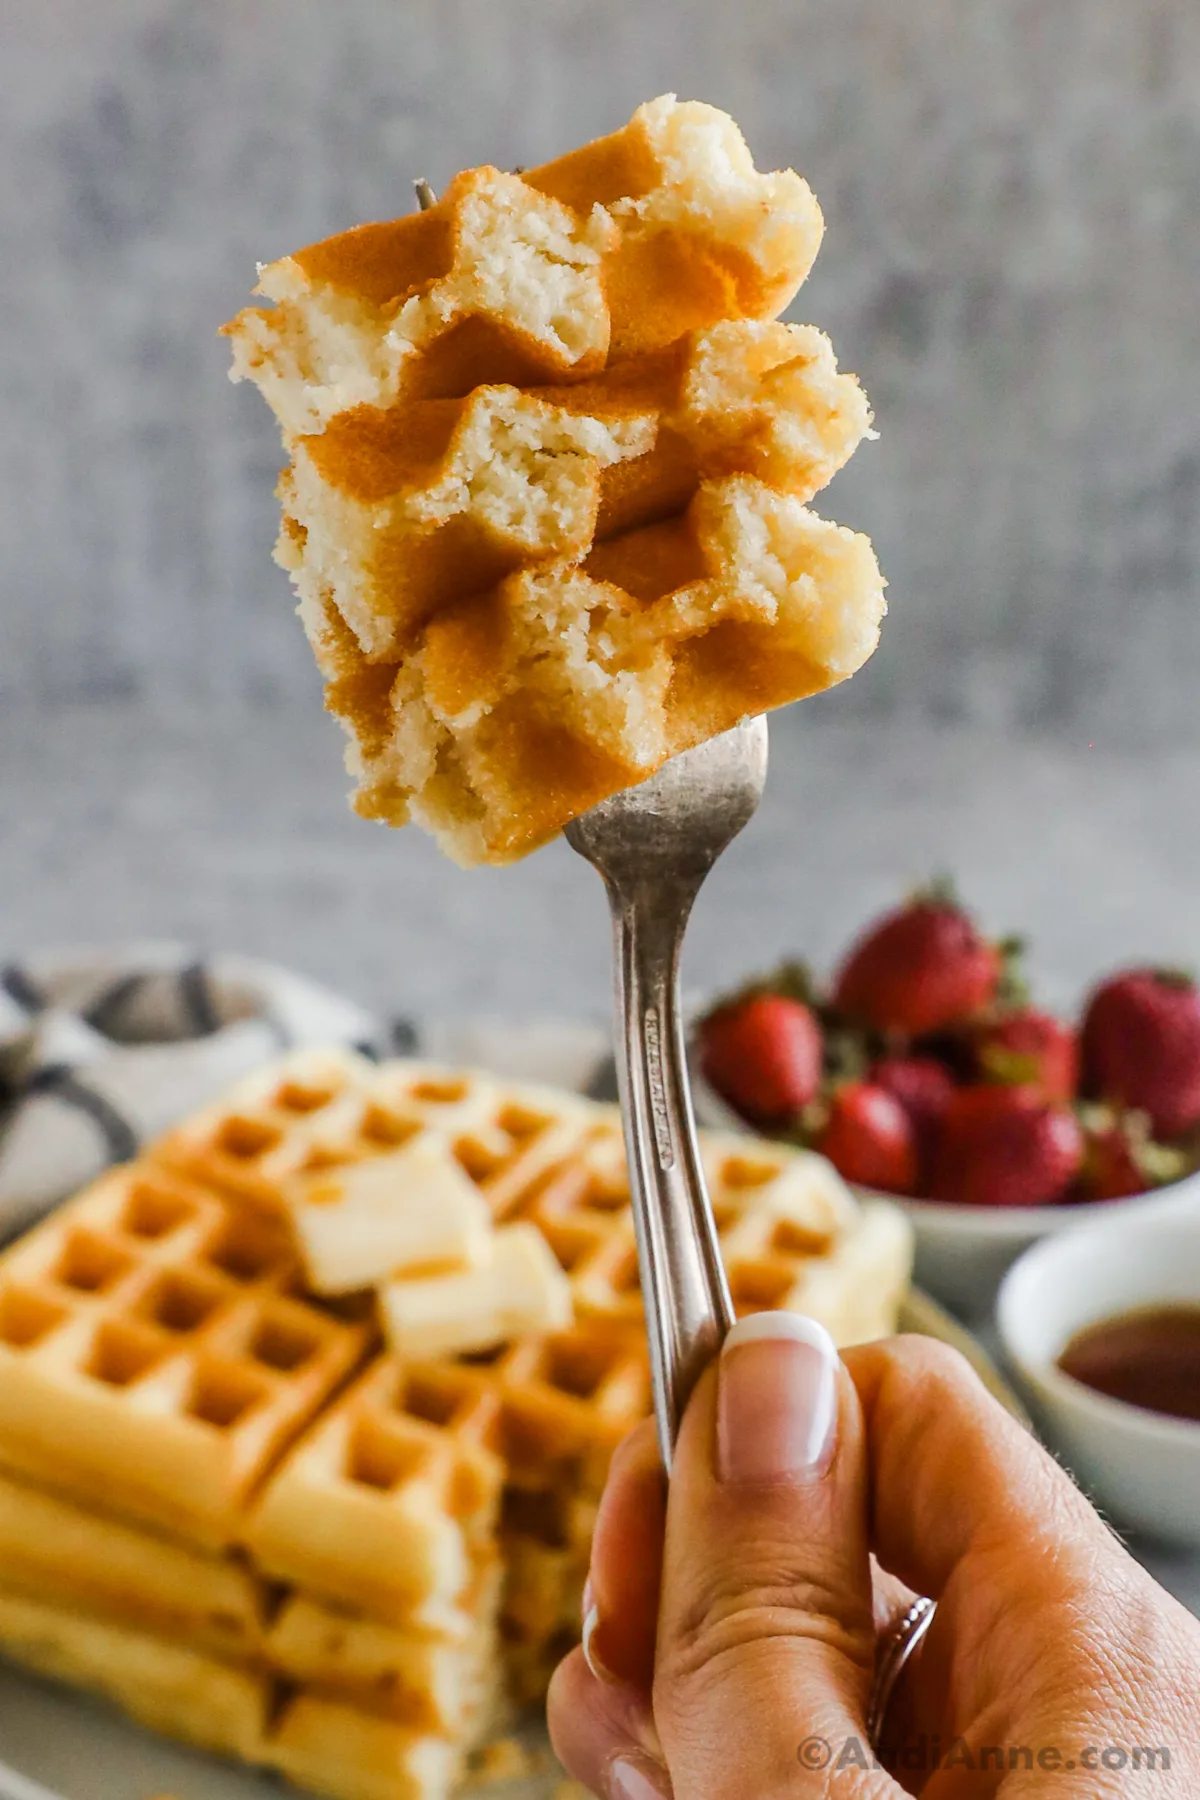 A hand holding a fork with a bite of waffles. Stack of waffles and bowl of strawberries in the background.